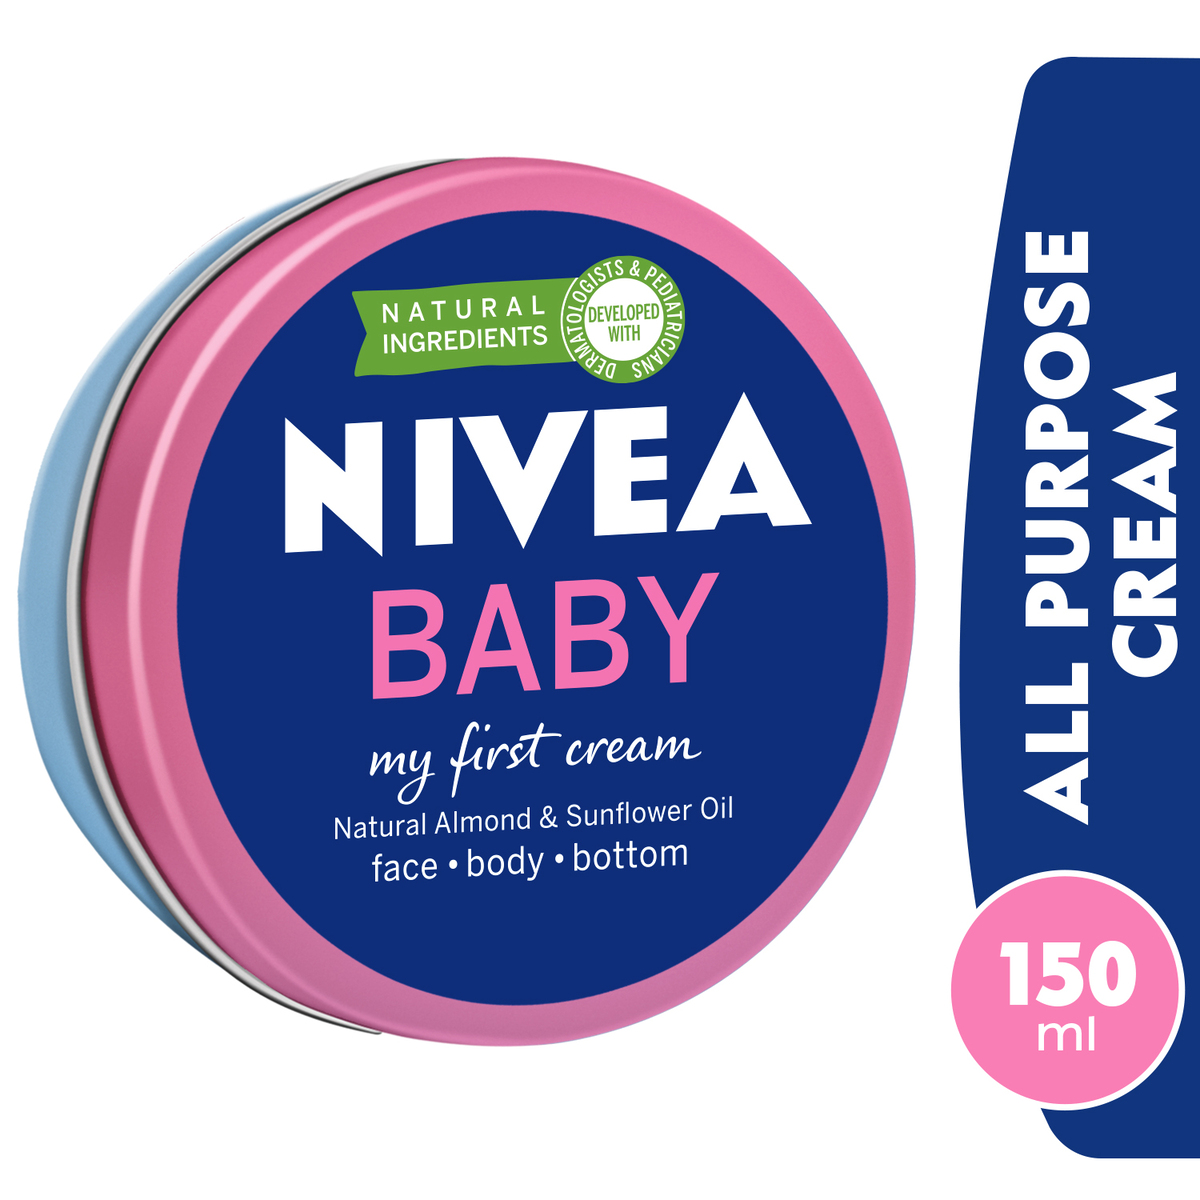 Nivea Baby Natural Almond And Sunflower Oil Cream 150ml